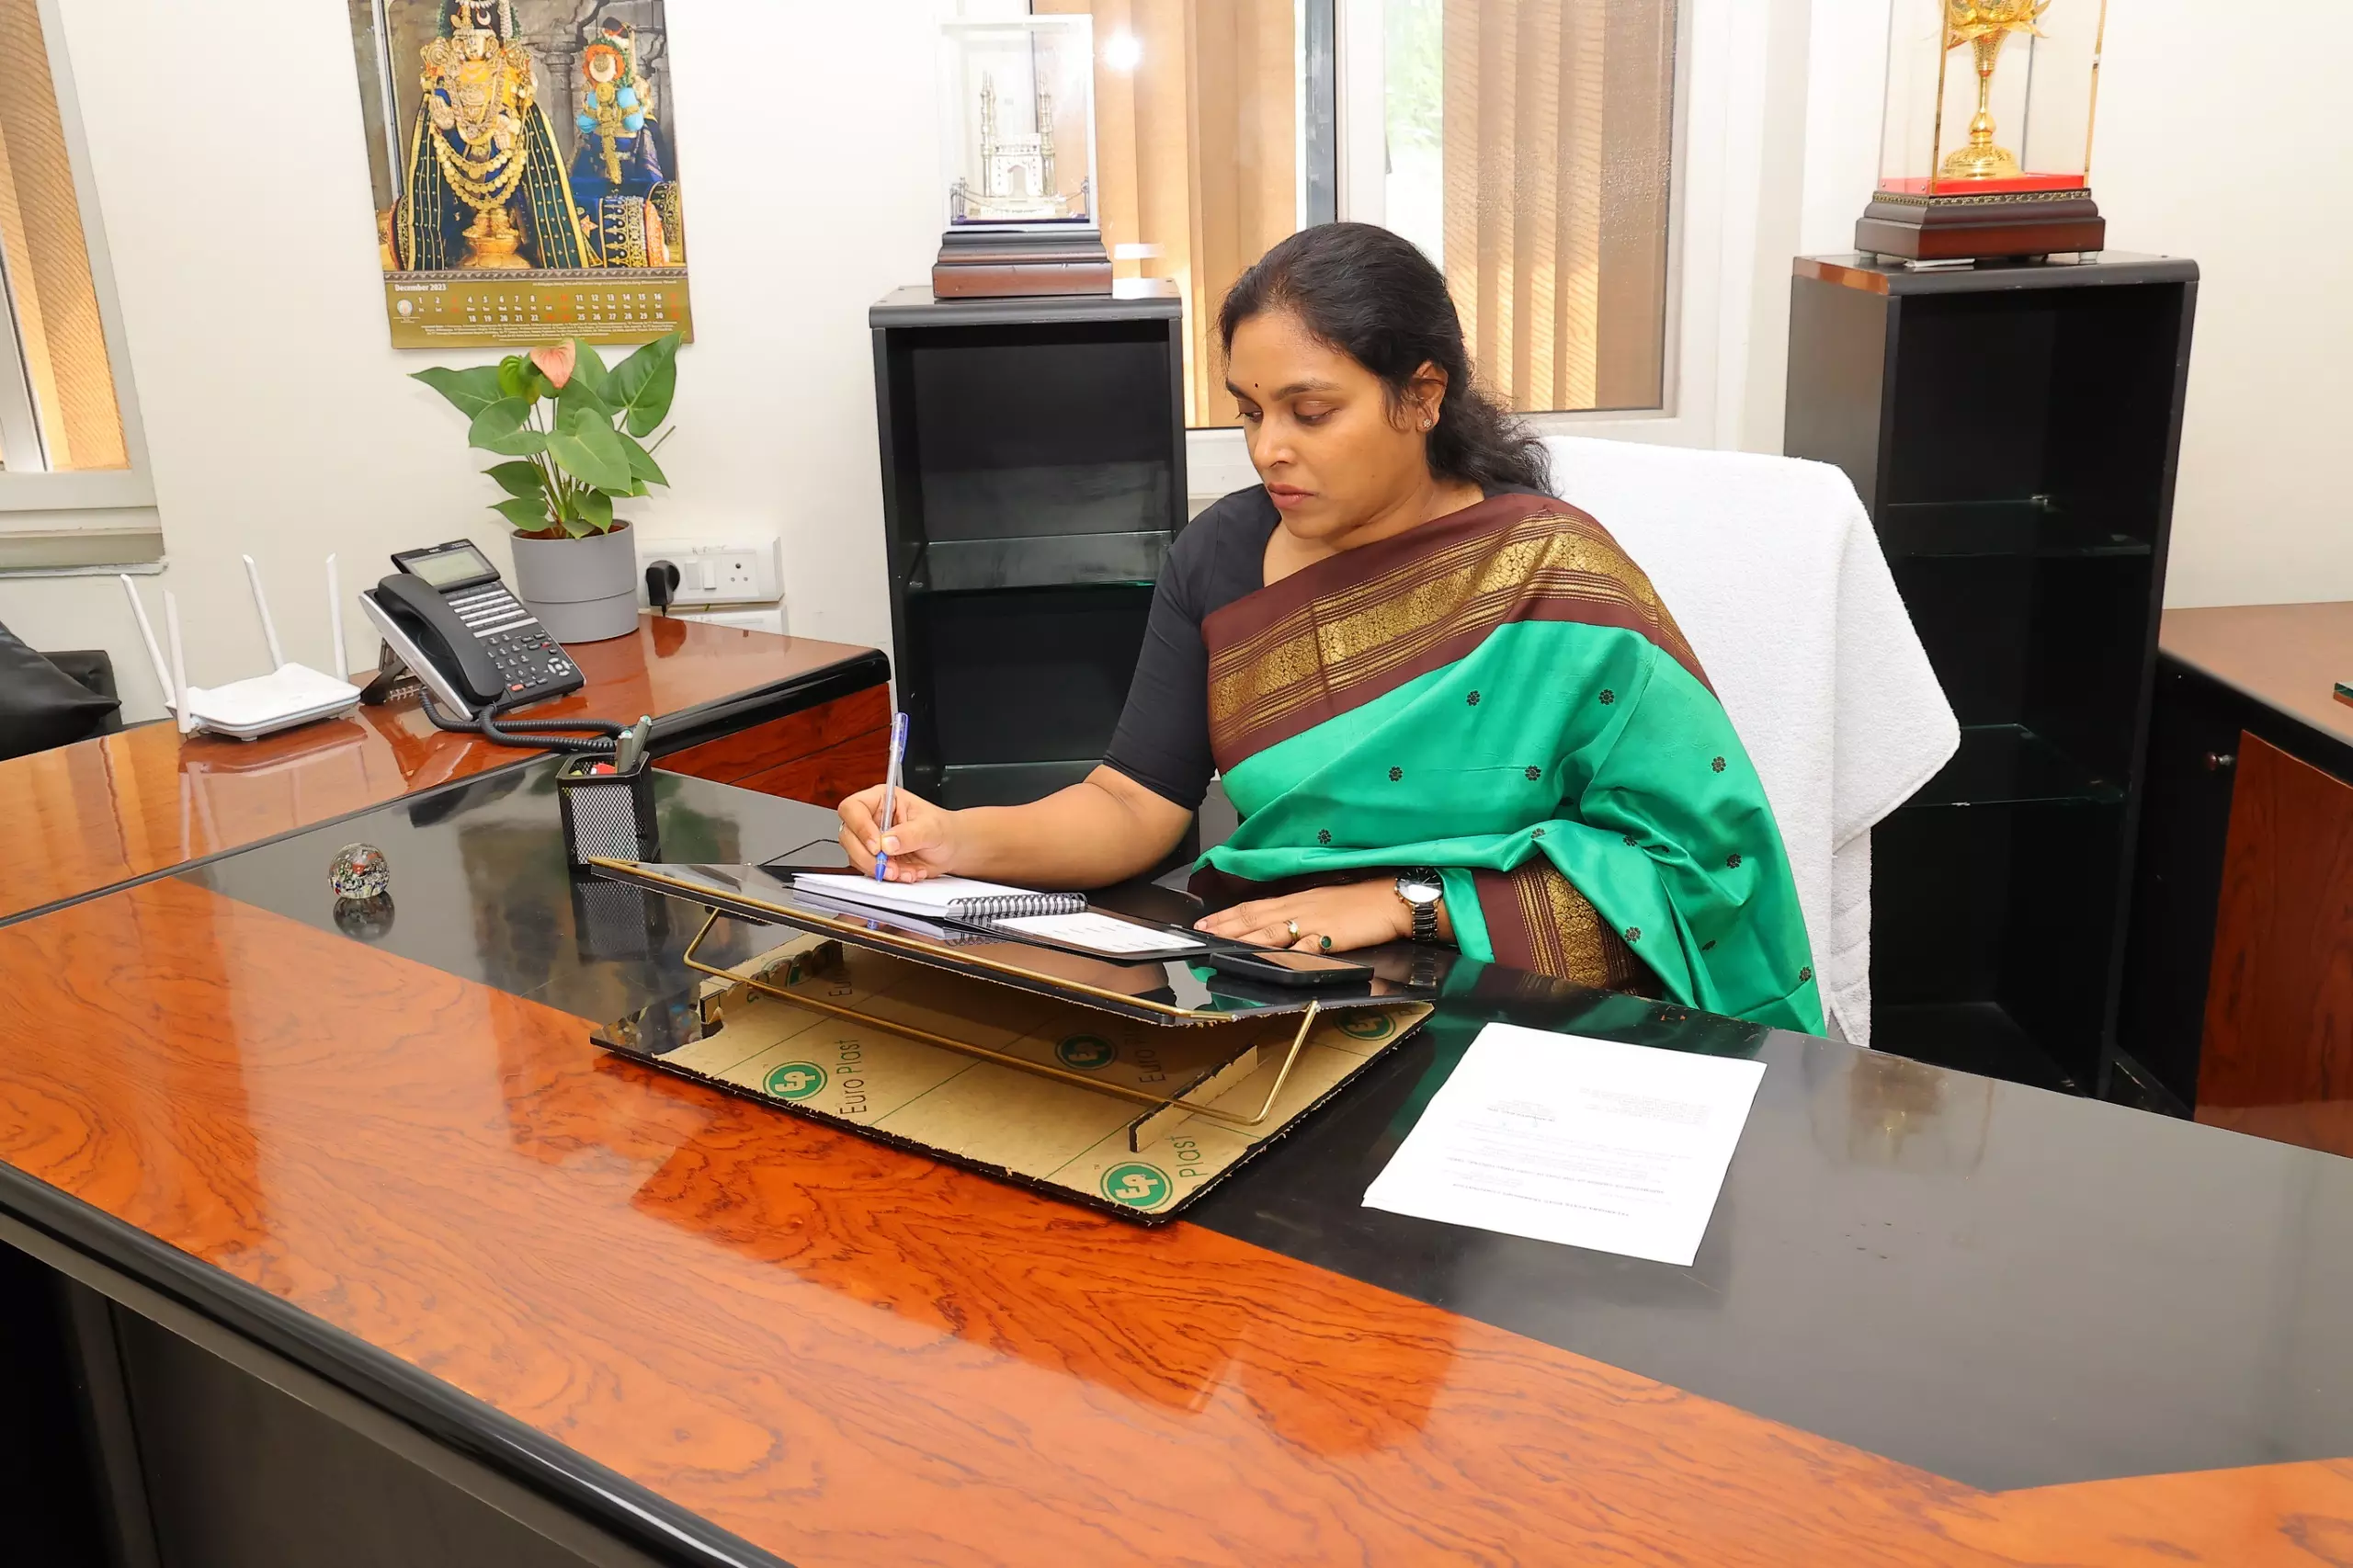 Apoorva Rao Assumes Charge As TSRTC Joint Director, First Woman To Secure Post